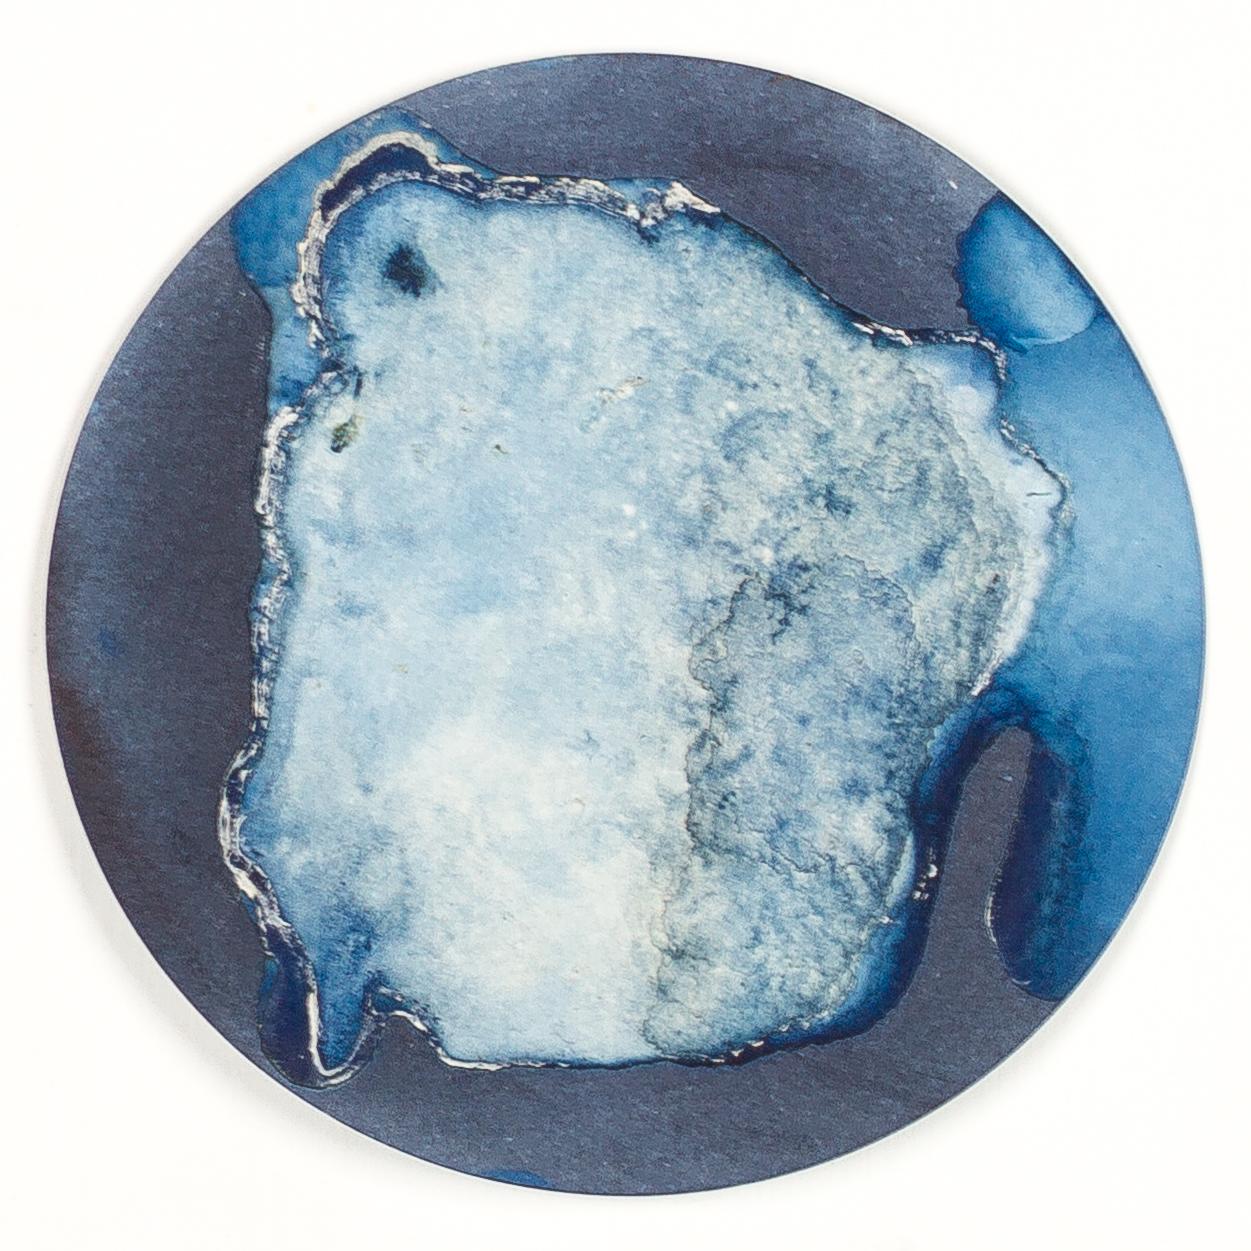 Medusas 11, 12 y 13. Cyanotype photograhs mounted in high resistance glass dish For Sale 1